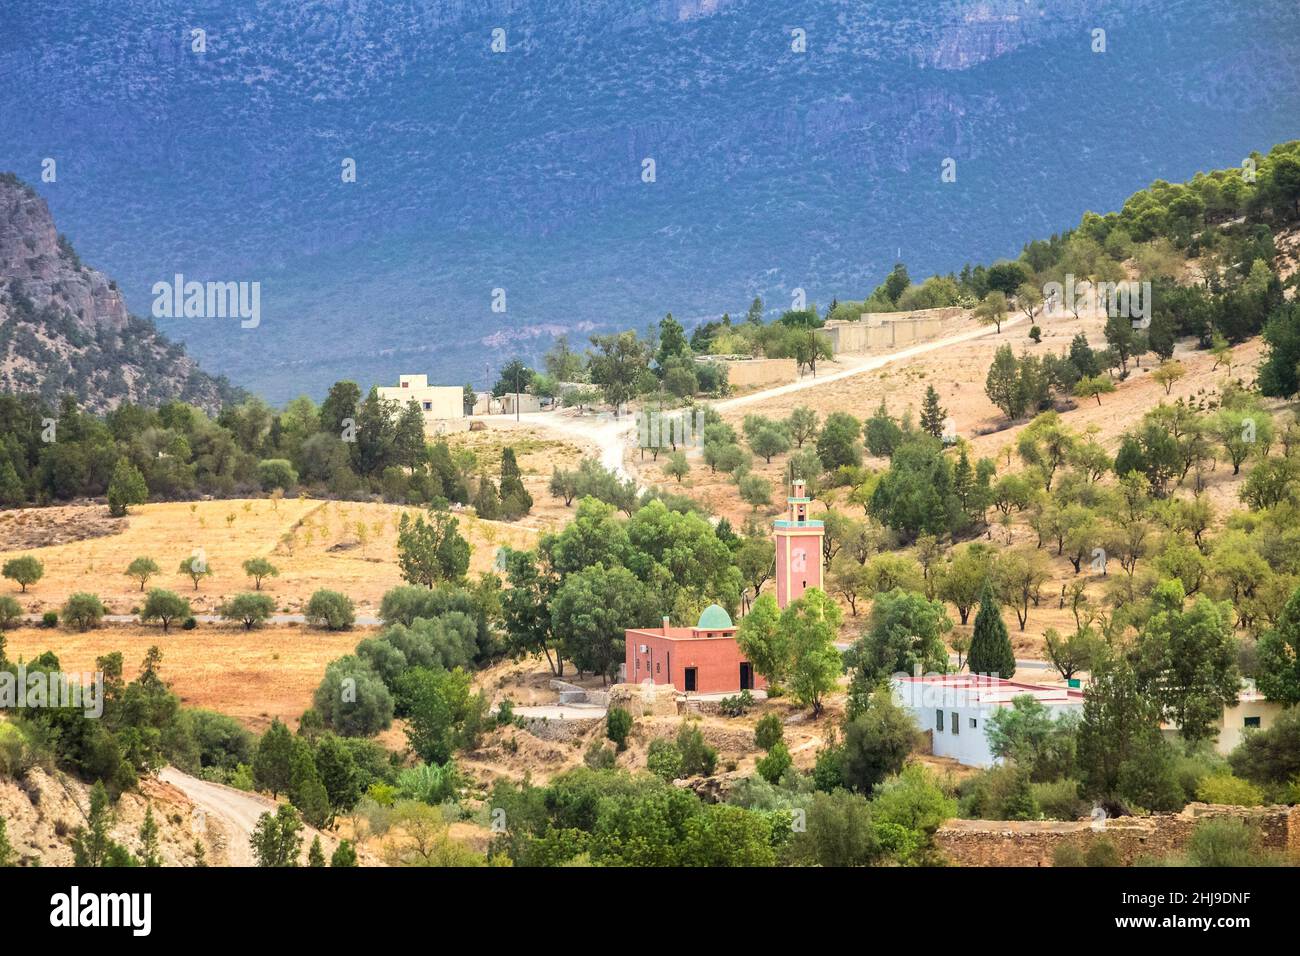 Mosque in landscape of the Beni Snassen Mountains in northeast Morocco, Africa. Stock Photo